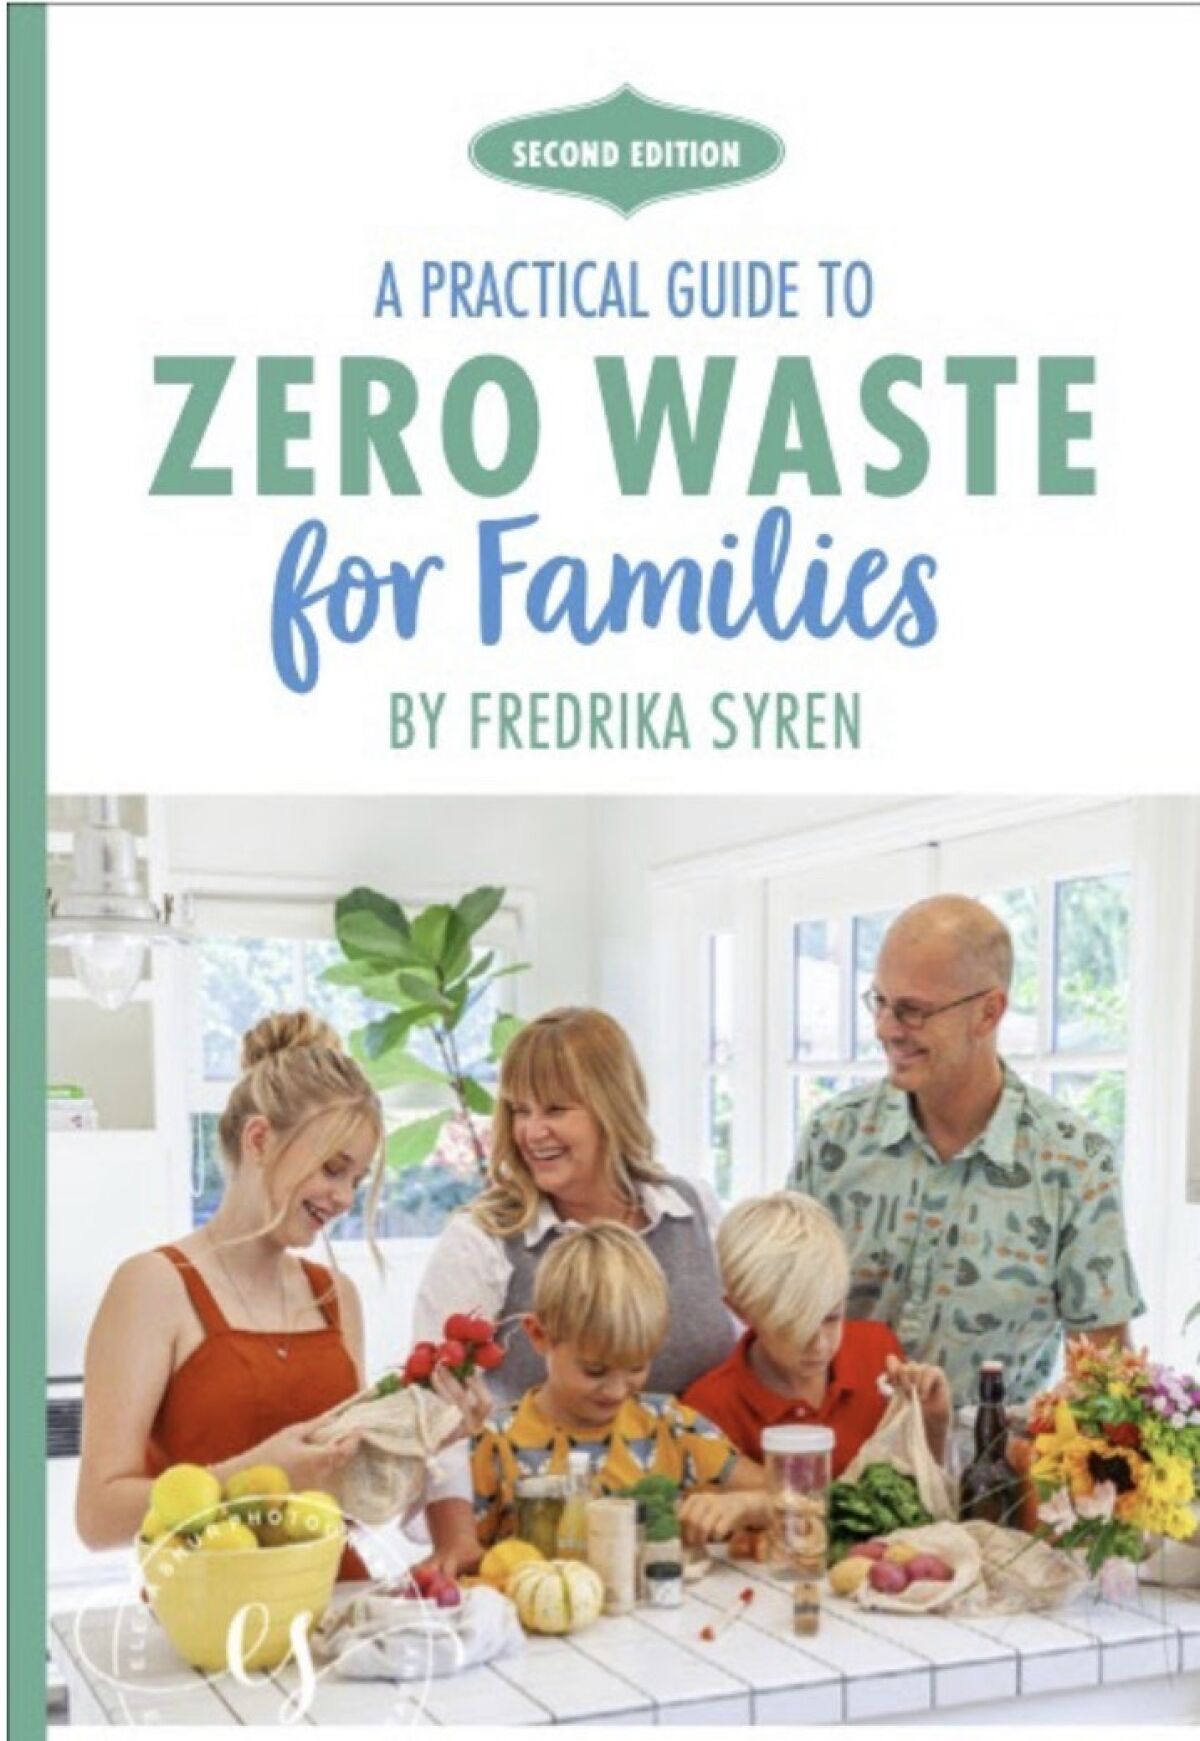 The cover of “A Practical Guide to Zero Waste for Families” by Fredrika Syren